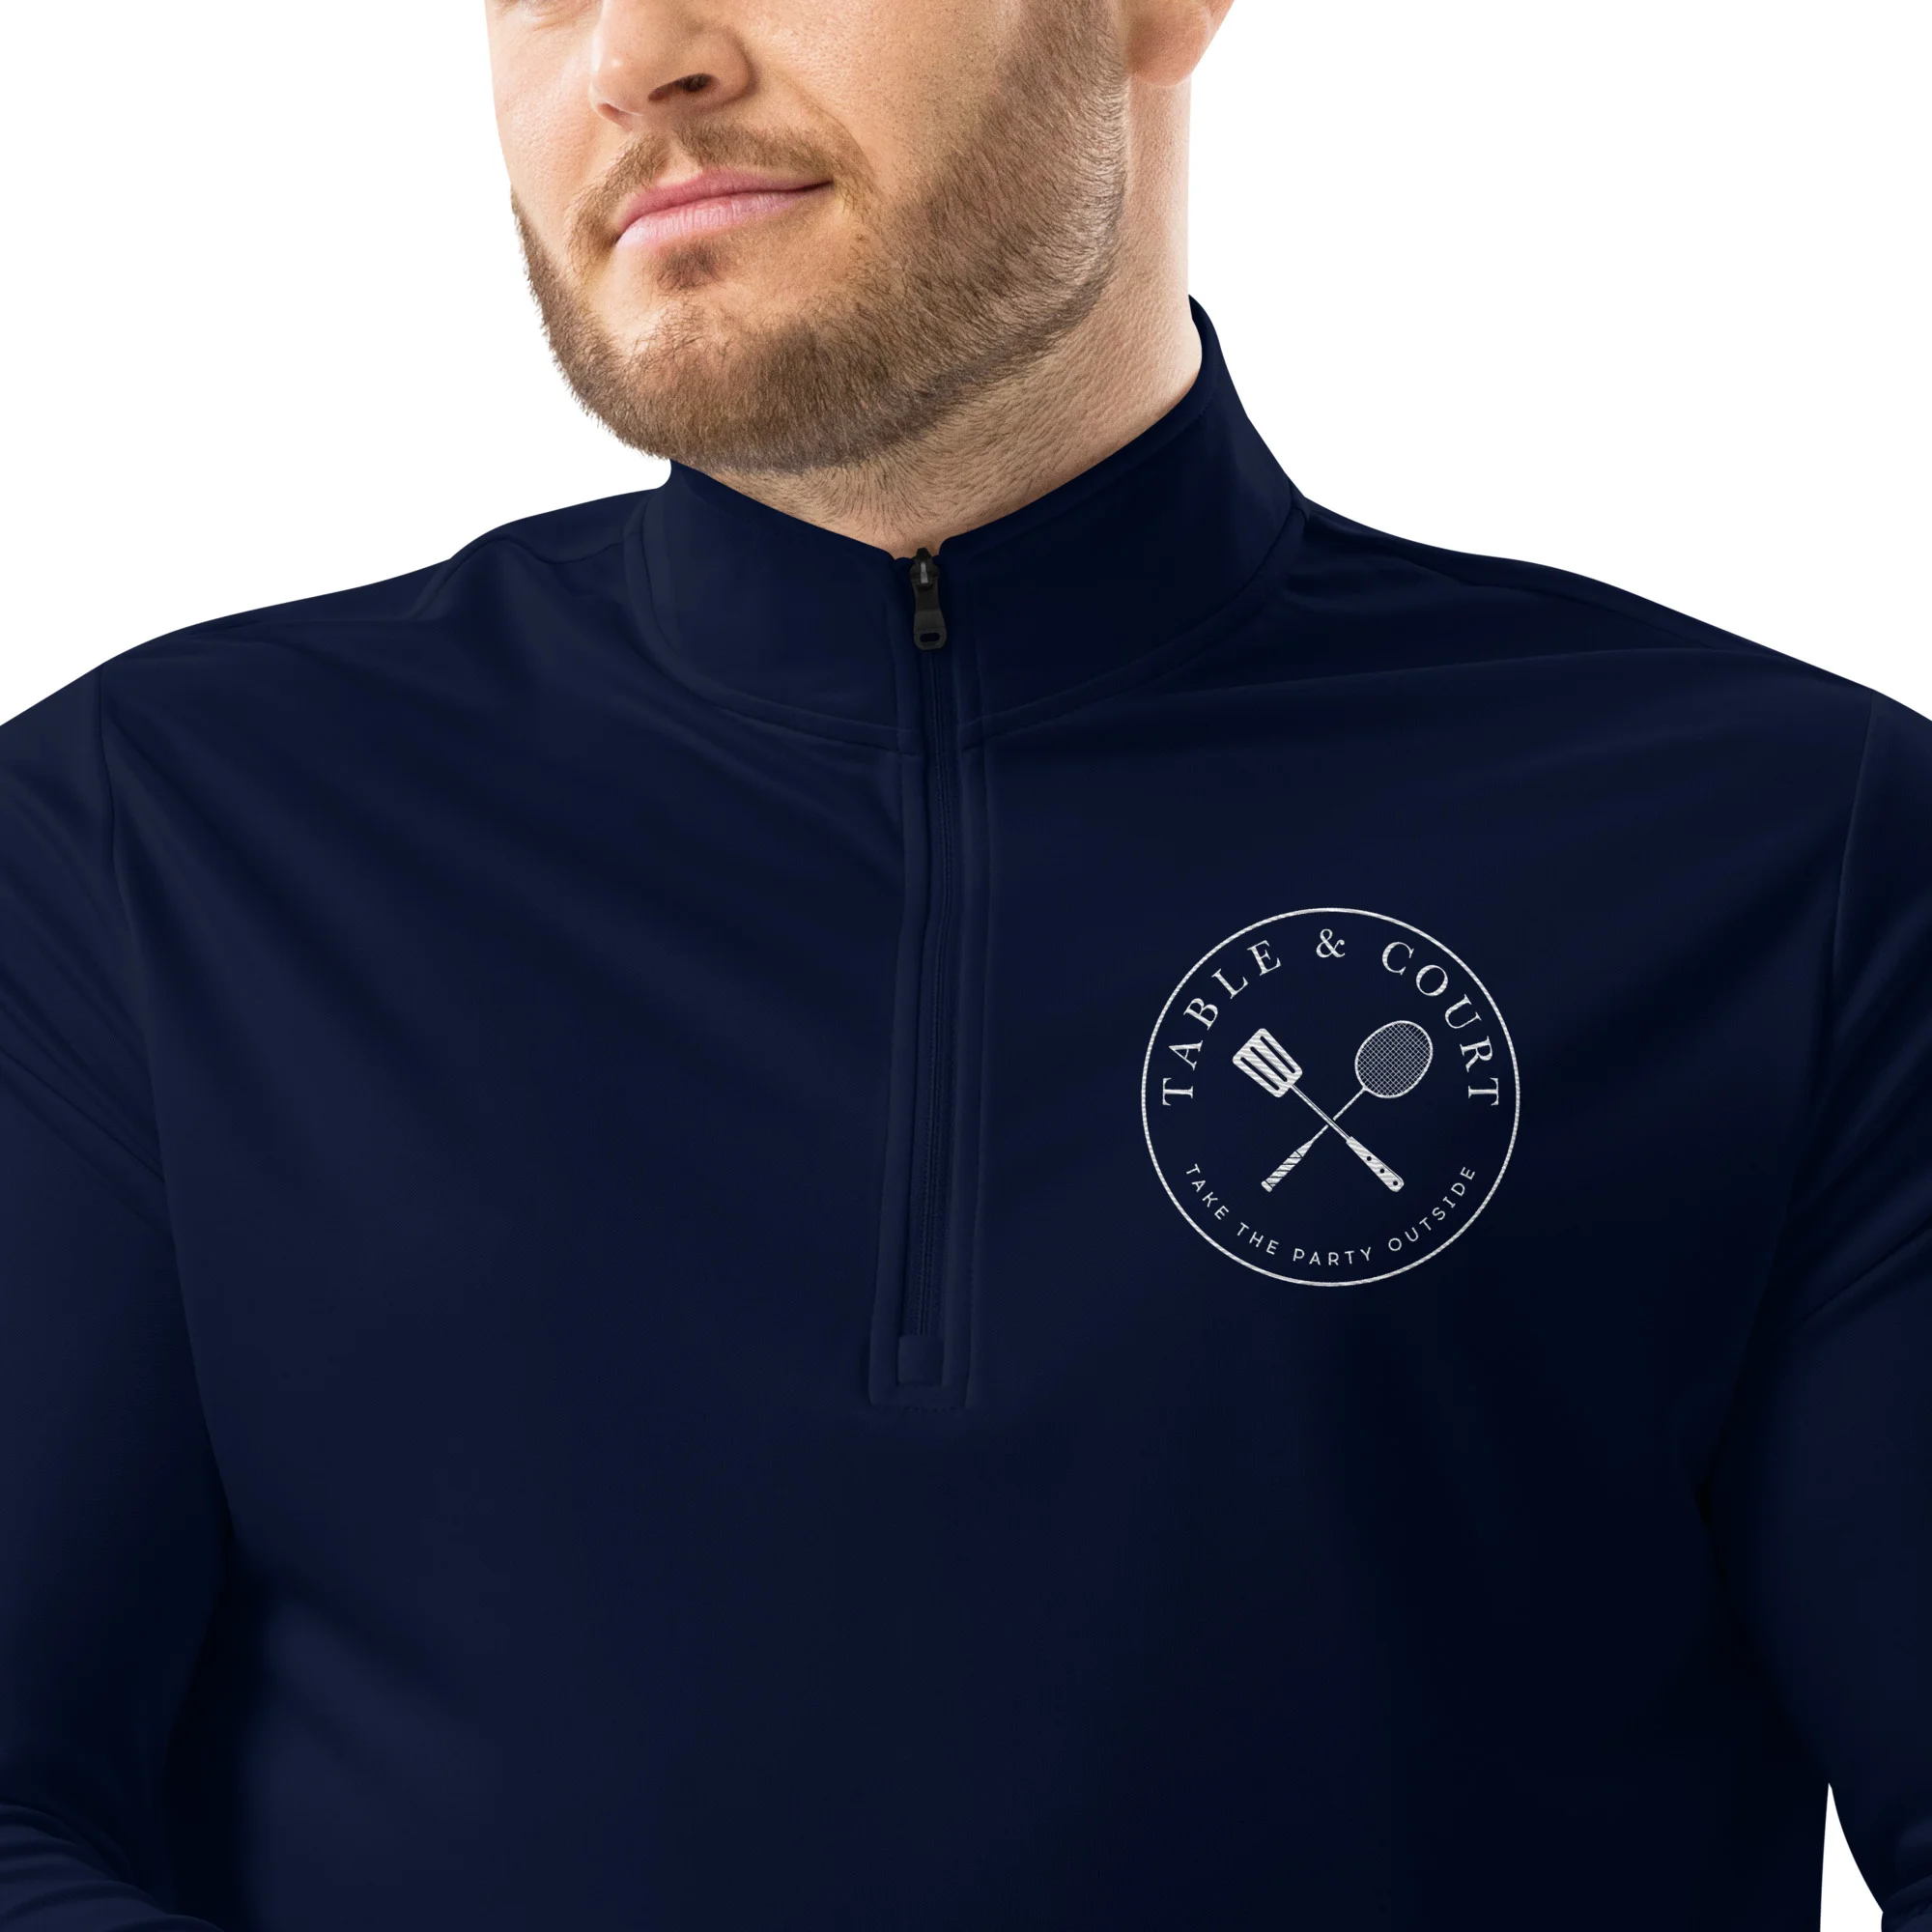 Mens Adidas Quarter Zip Pullover by Table and Court - White Logo - Navy